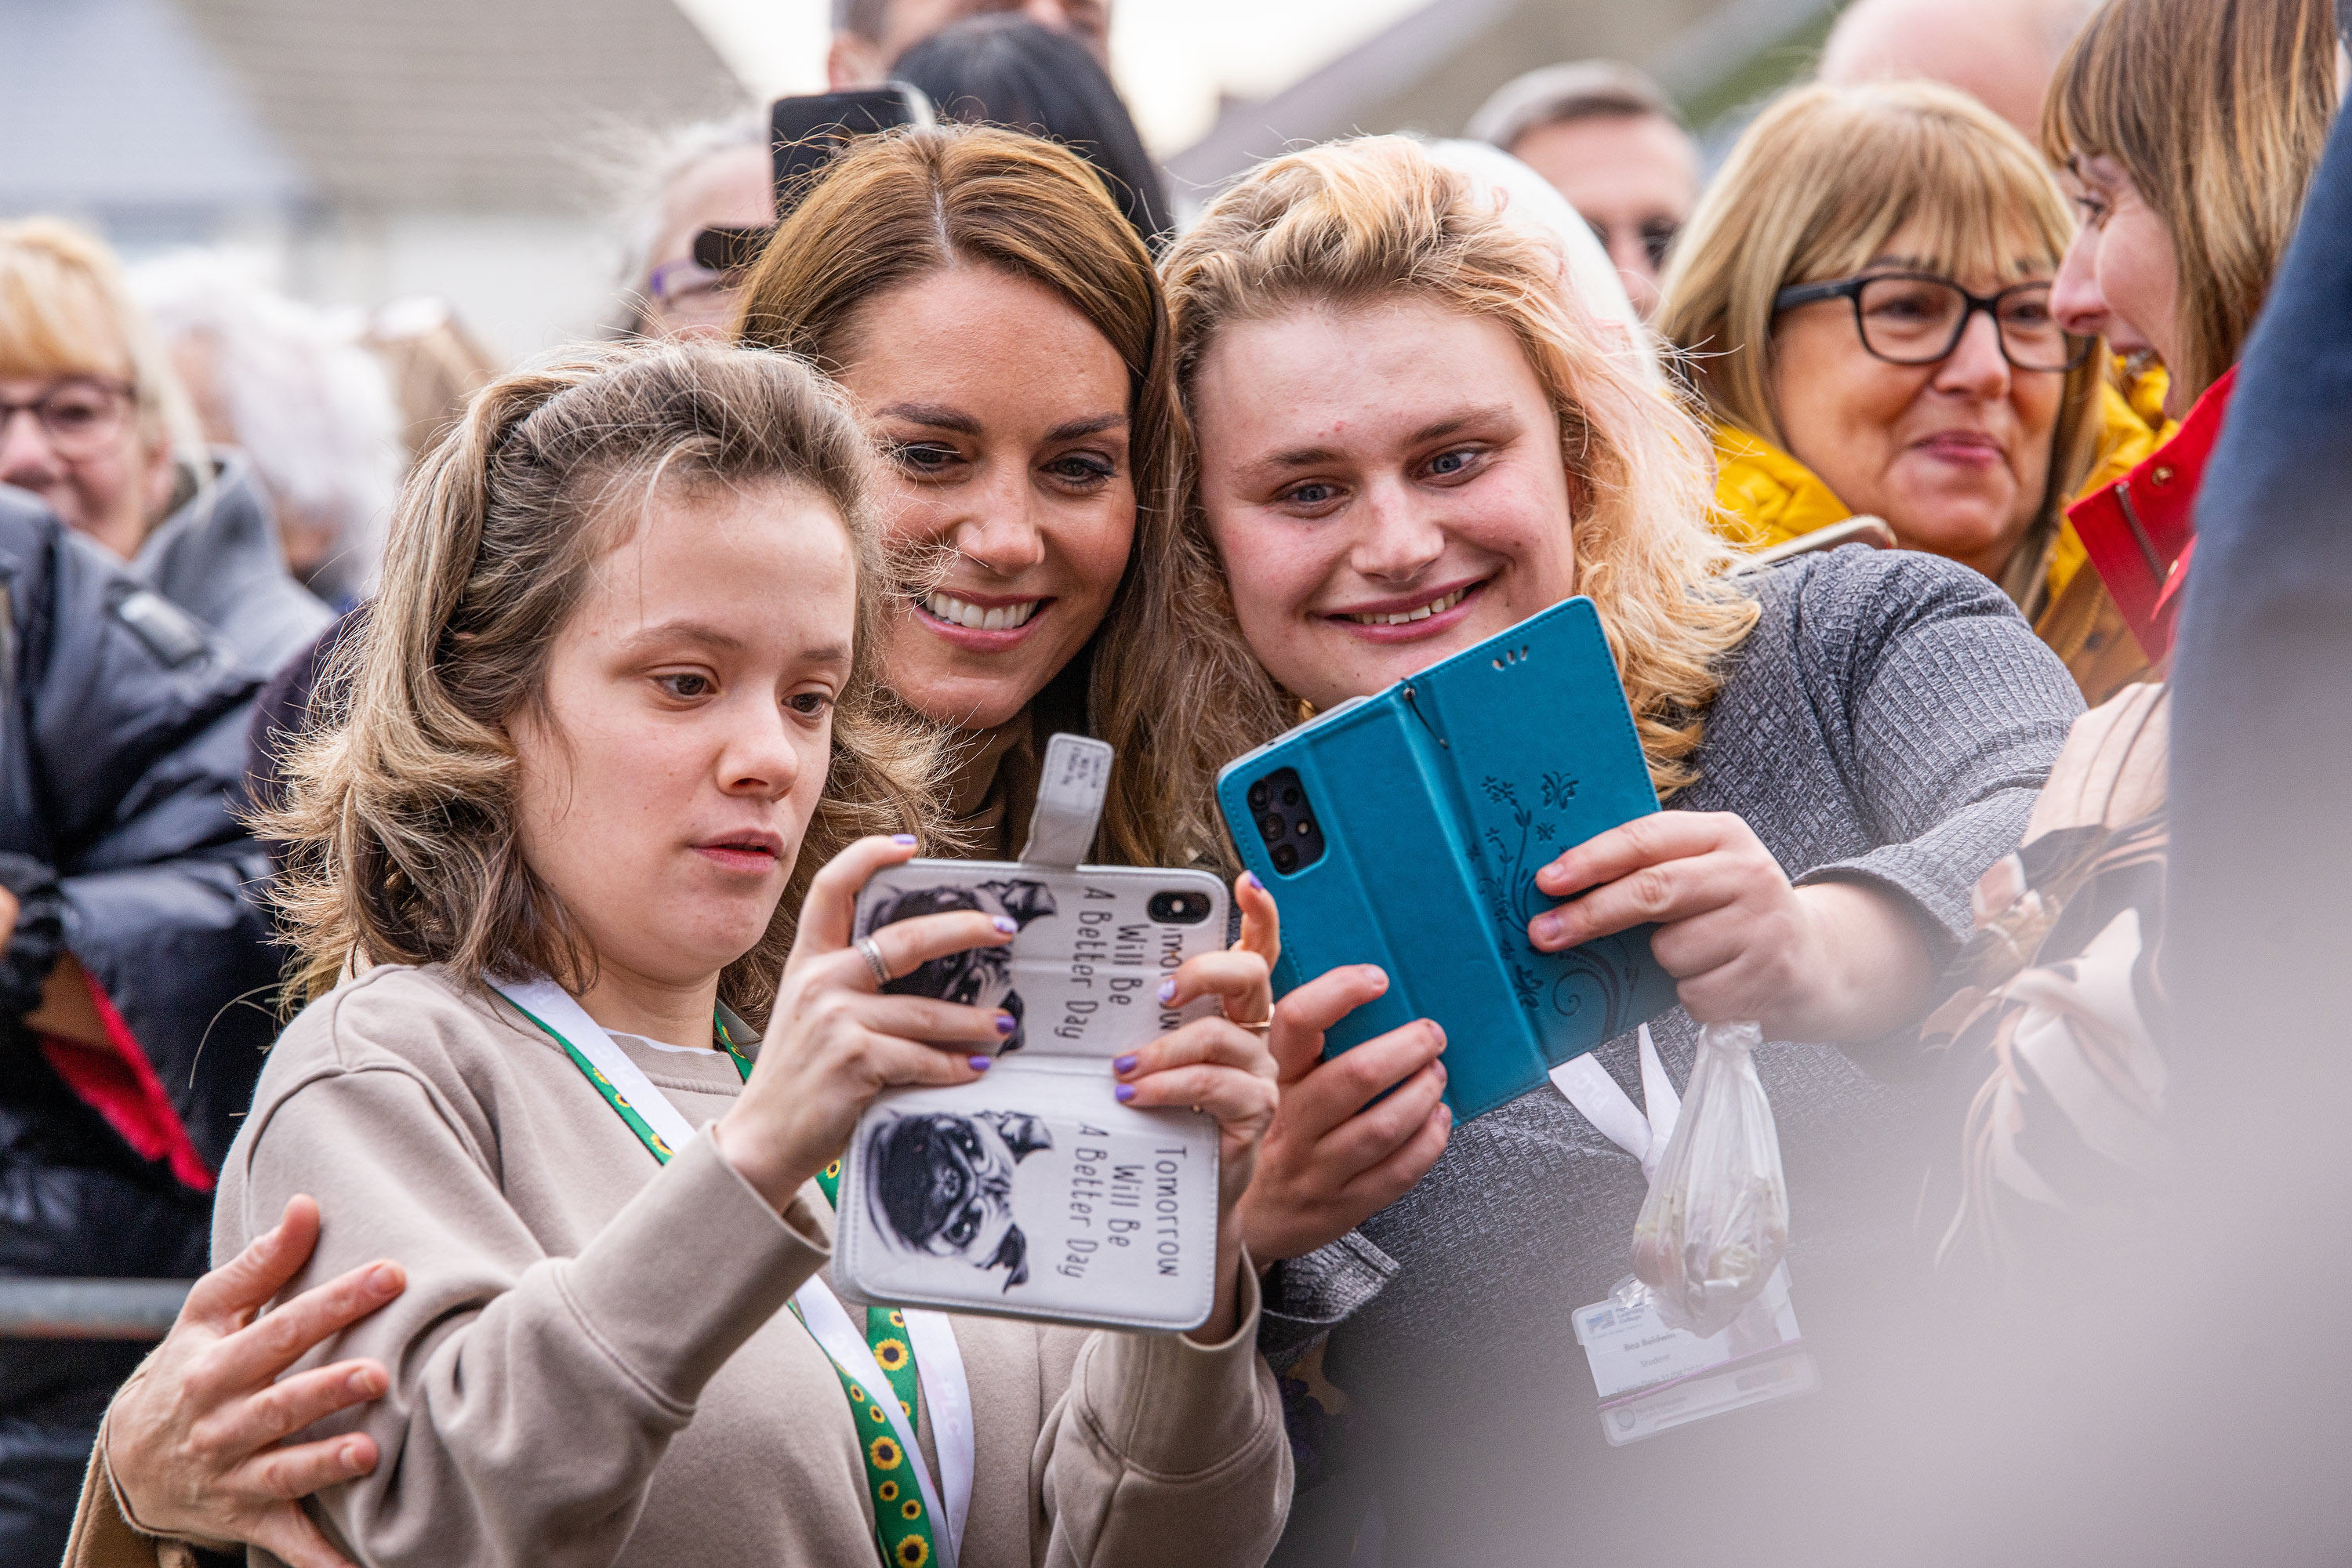 Kate Middleton takes selfies with two well-wishers during her Scarborough, England trip.